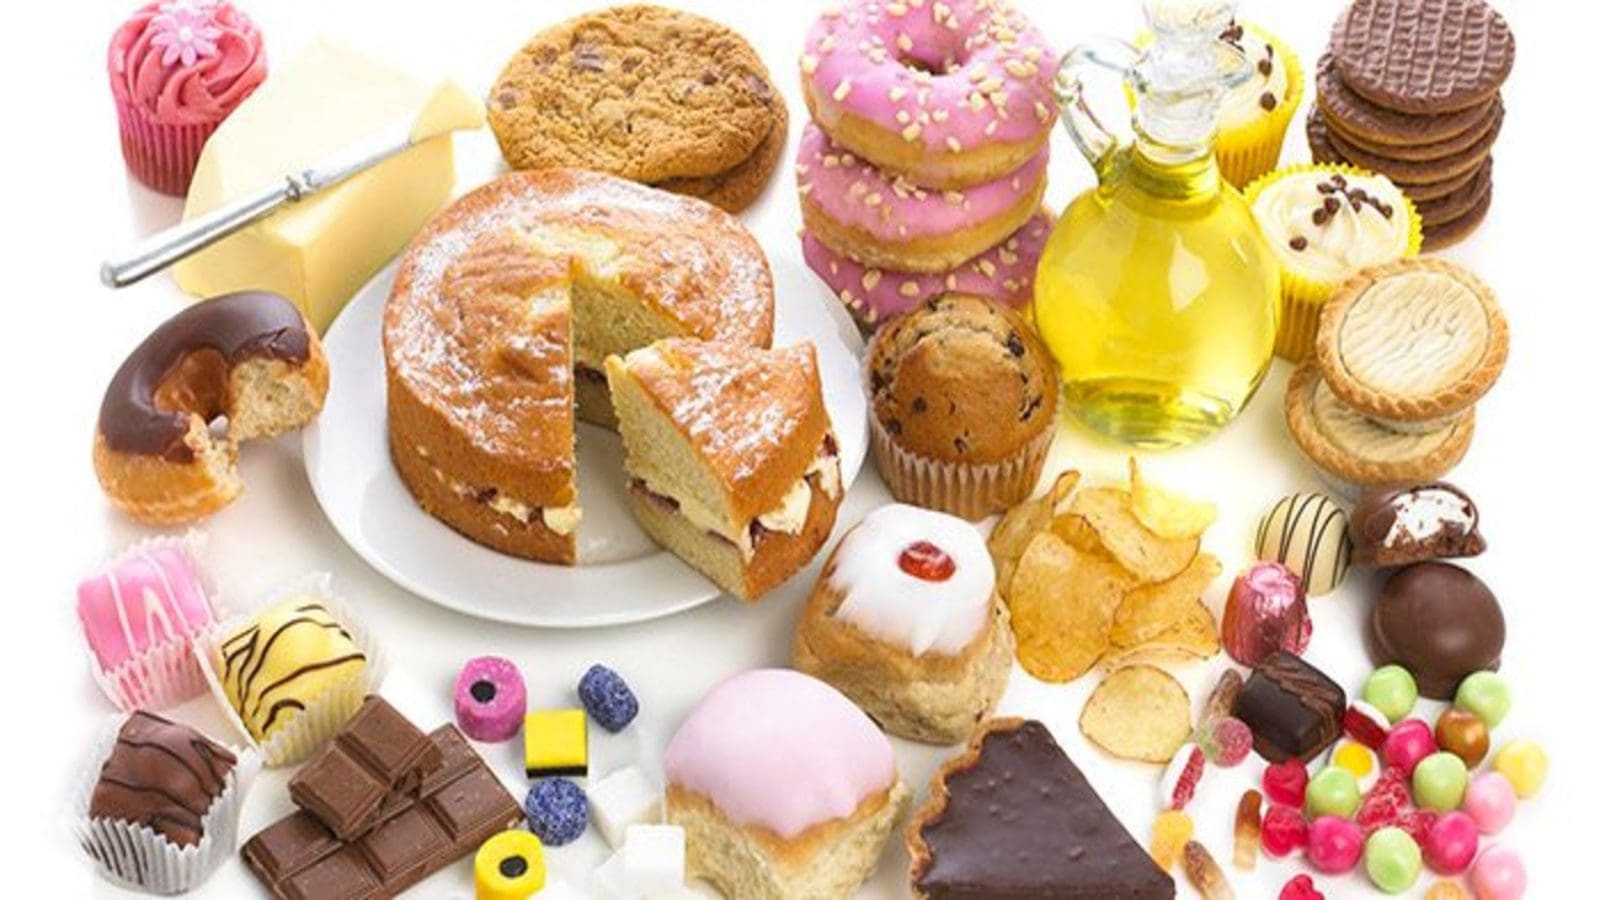 There is an unmet need for healthier baked goods, Cargill sweet baked goods survey finds